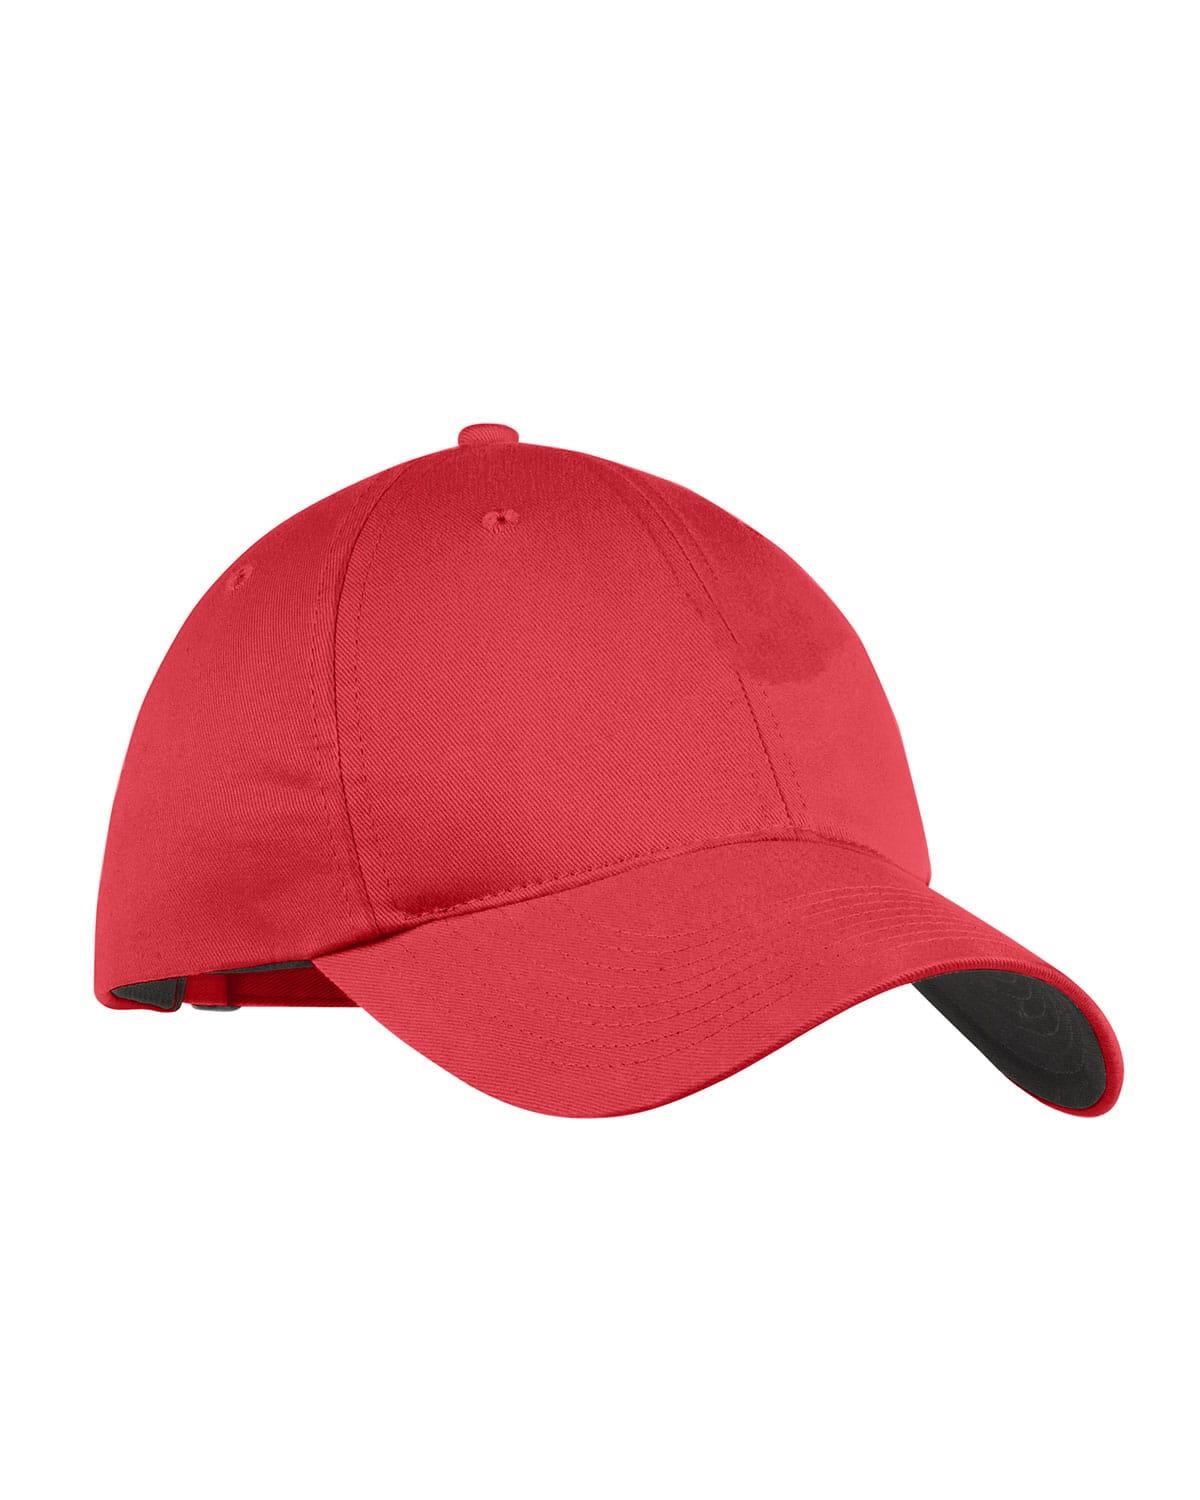 Nike Golf 580087 Unstructured Twill Cap